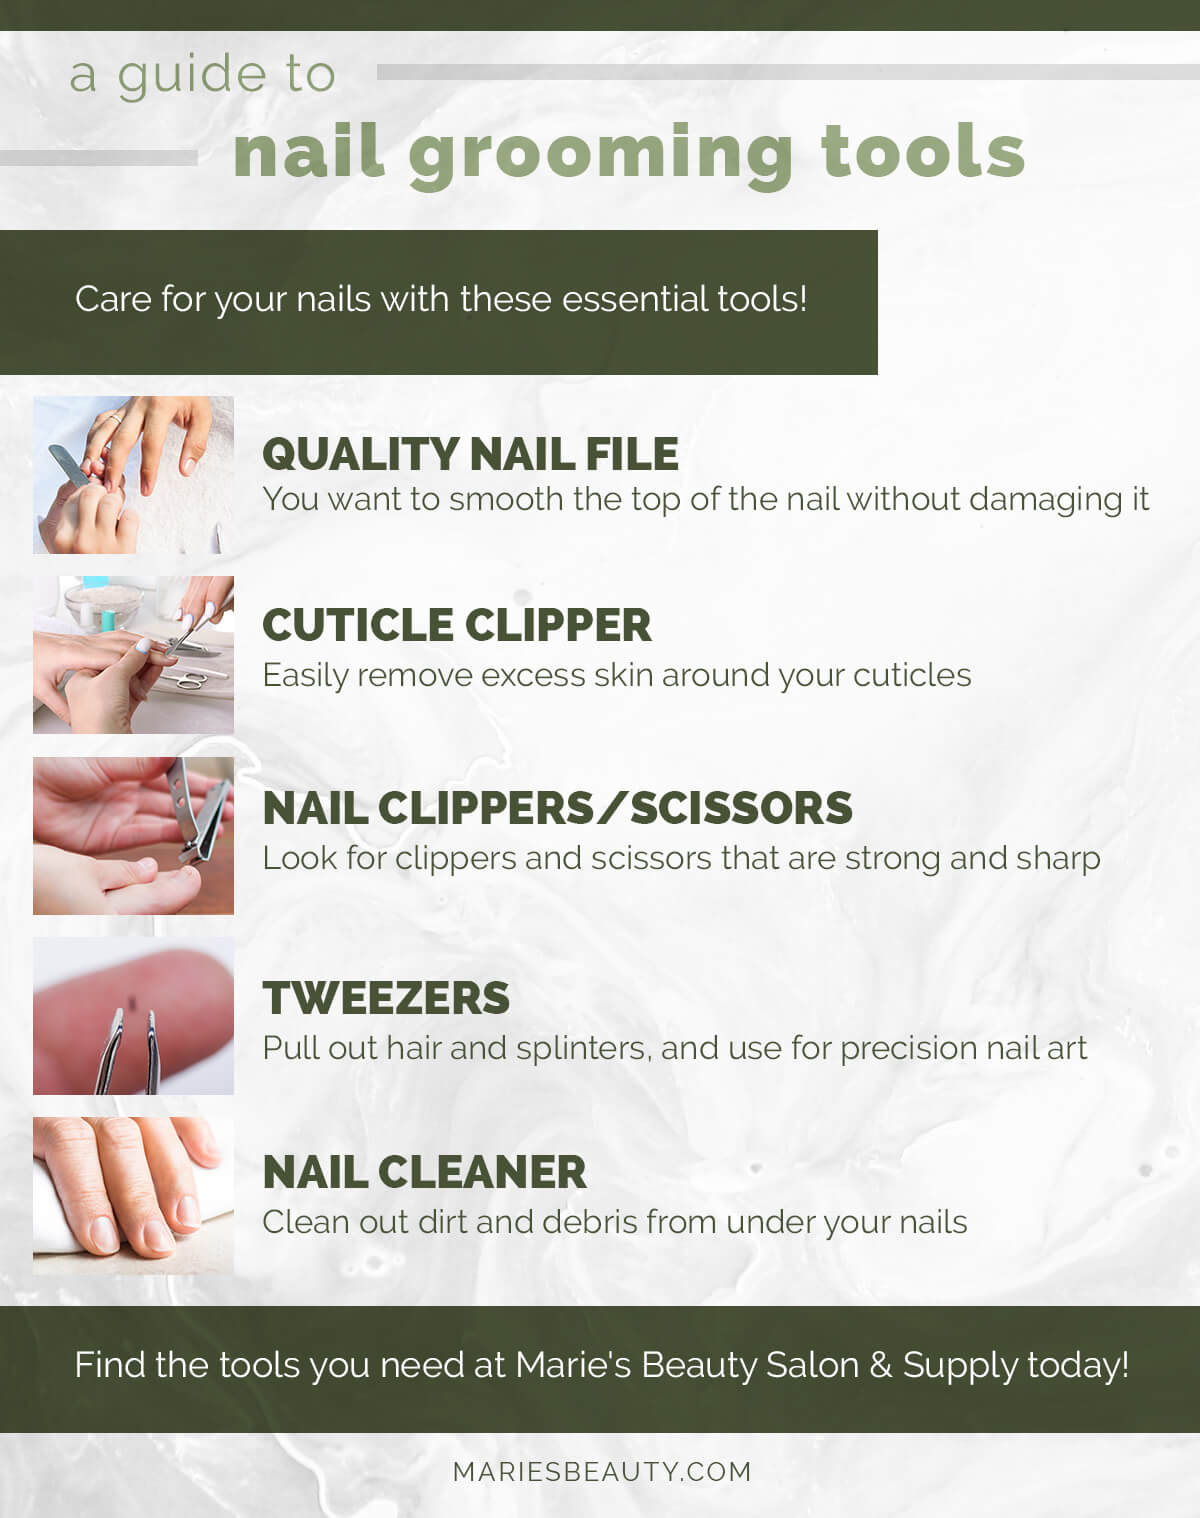 Beauty Care Anchorage - A Guide To Nail Grooming Tools